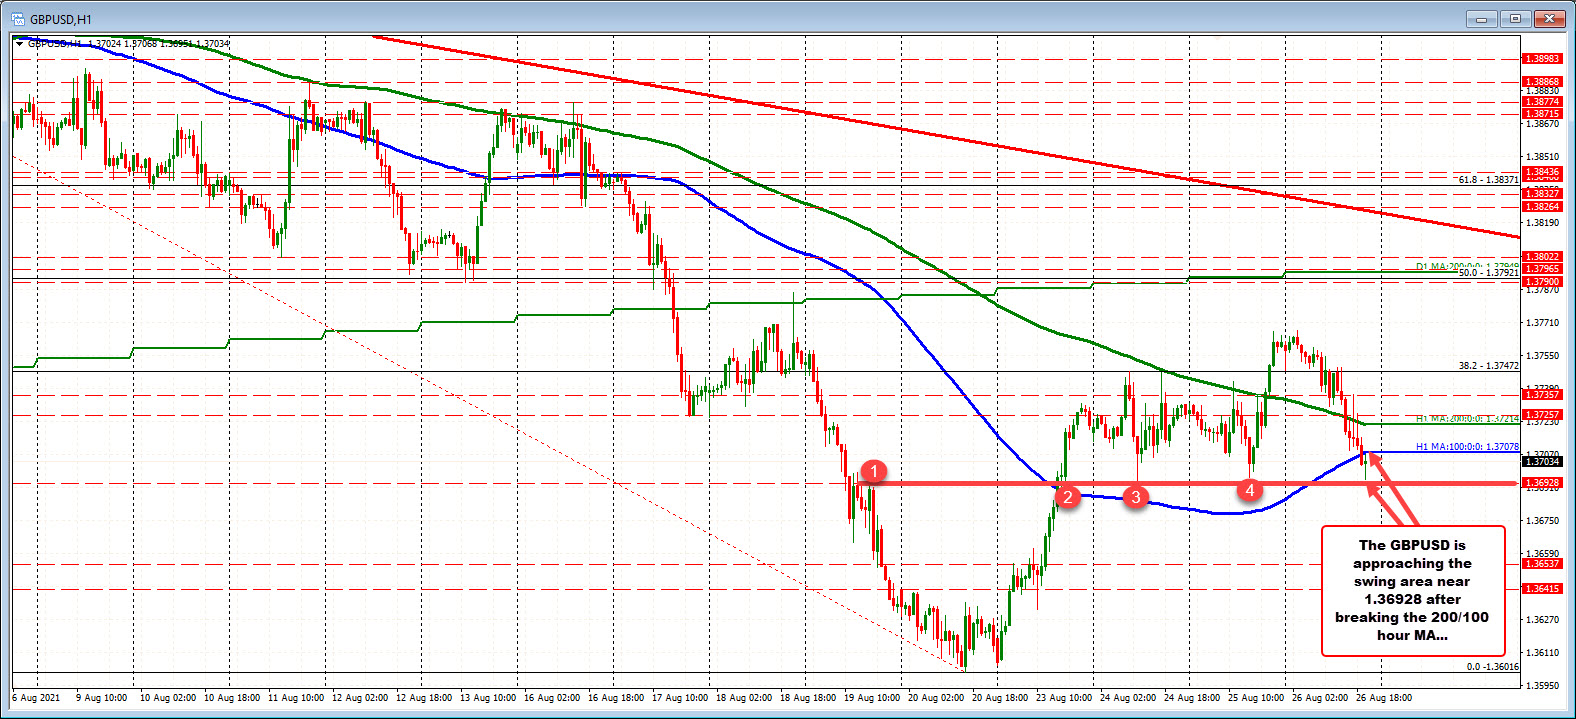 GBPUSD retests lows from yesterday and Tuesday now